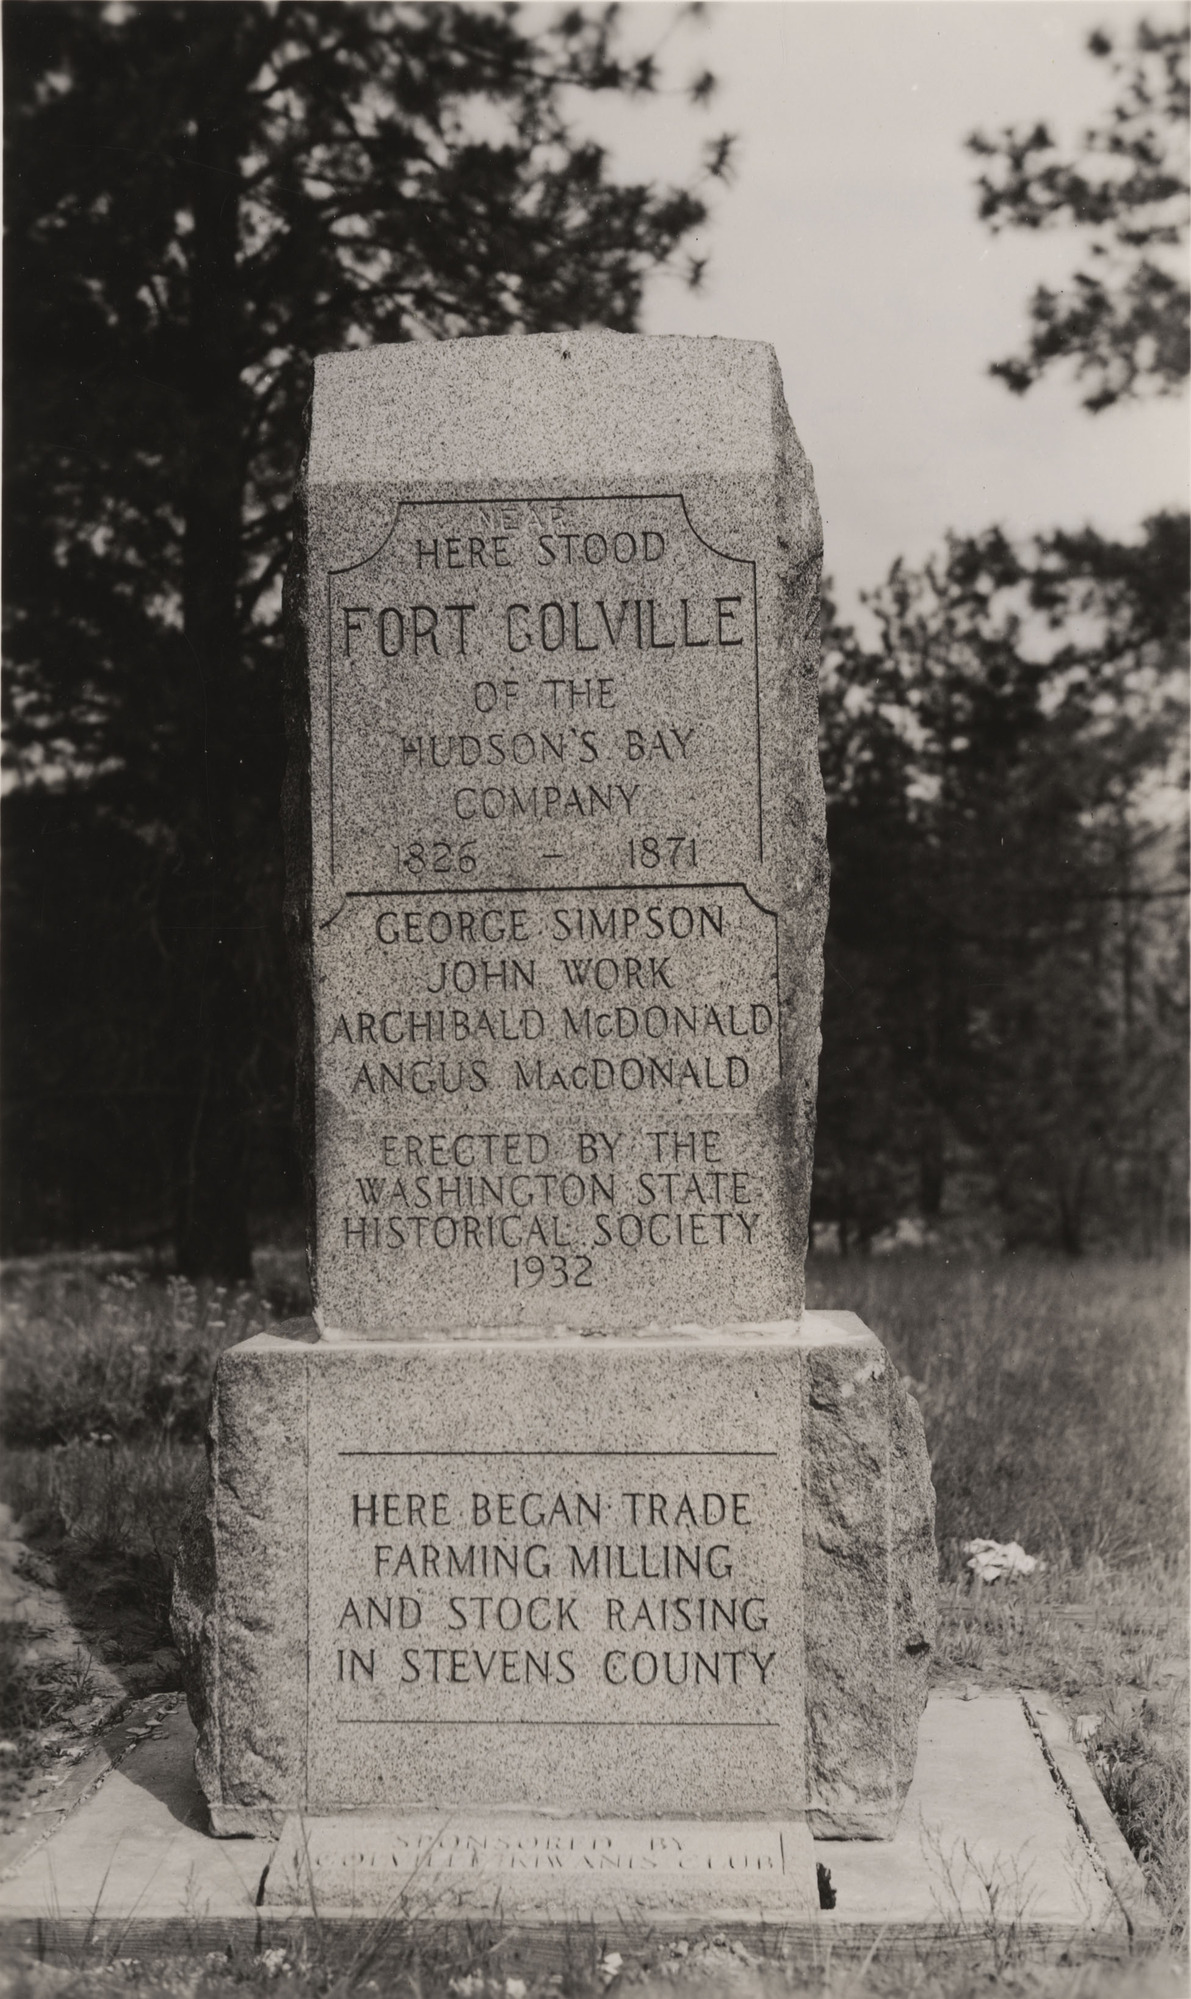 Black and white photograph of two tiered engraved stone monument